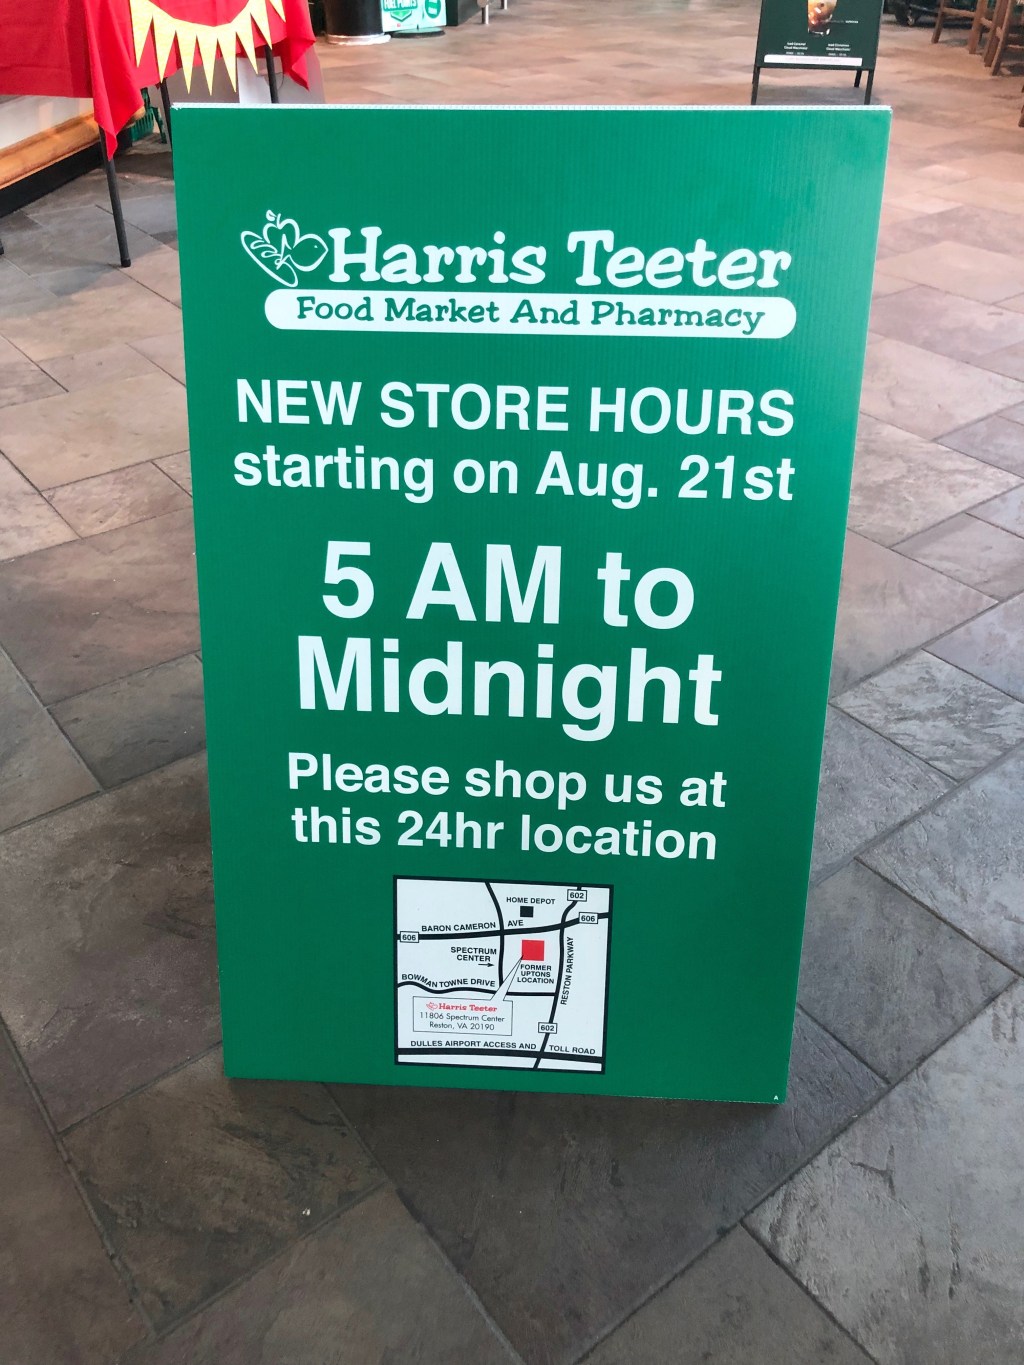 New Store hours for Harris Teeter